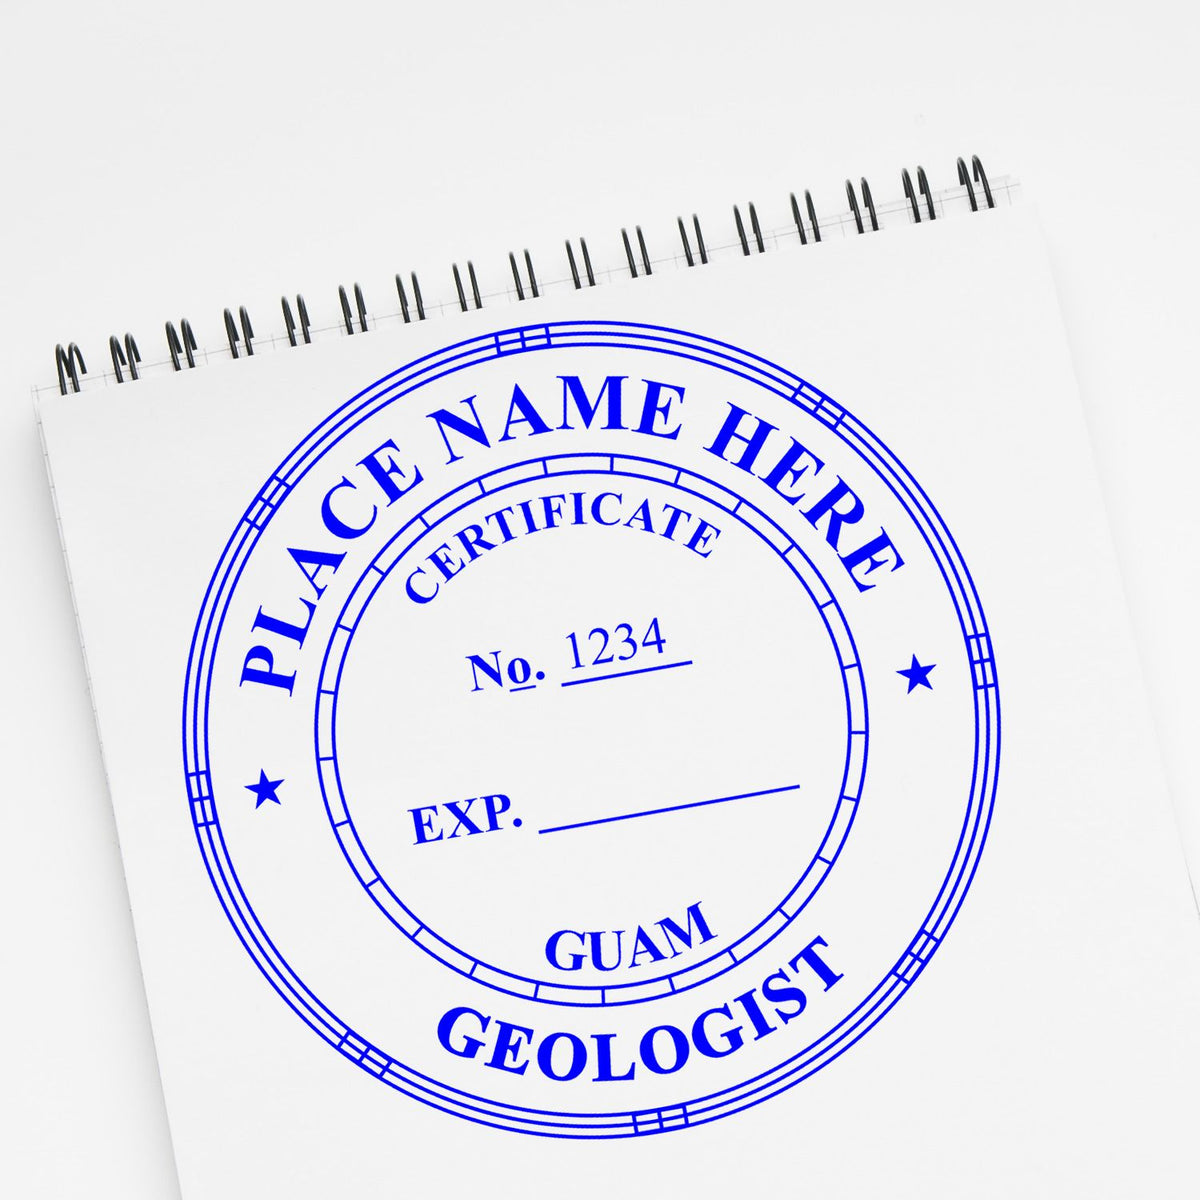 The Slim Pre-Inked Guam Professional Geologist Seal Stamp  impression comes to life with a crisp, detailed image stamped on paper - showcasing true professional quality.